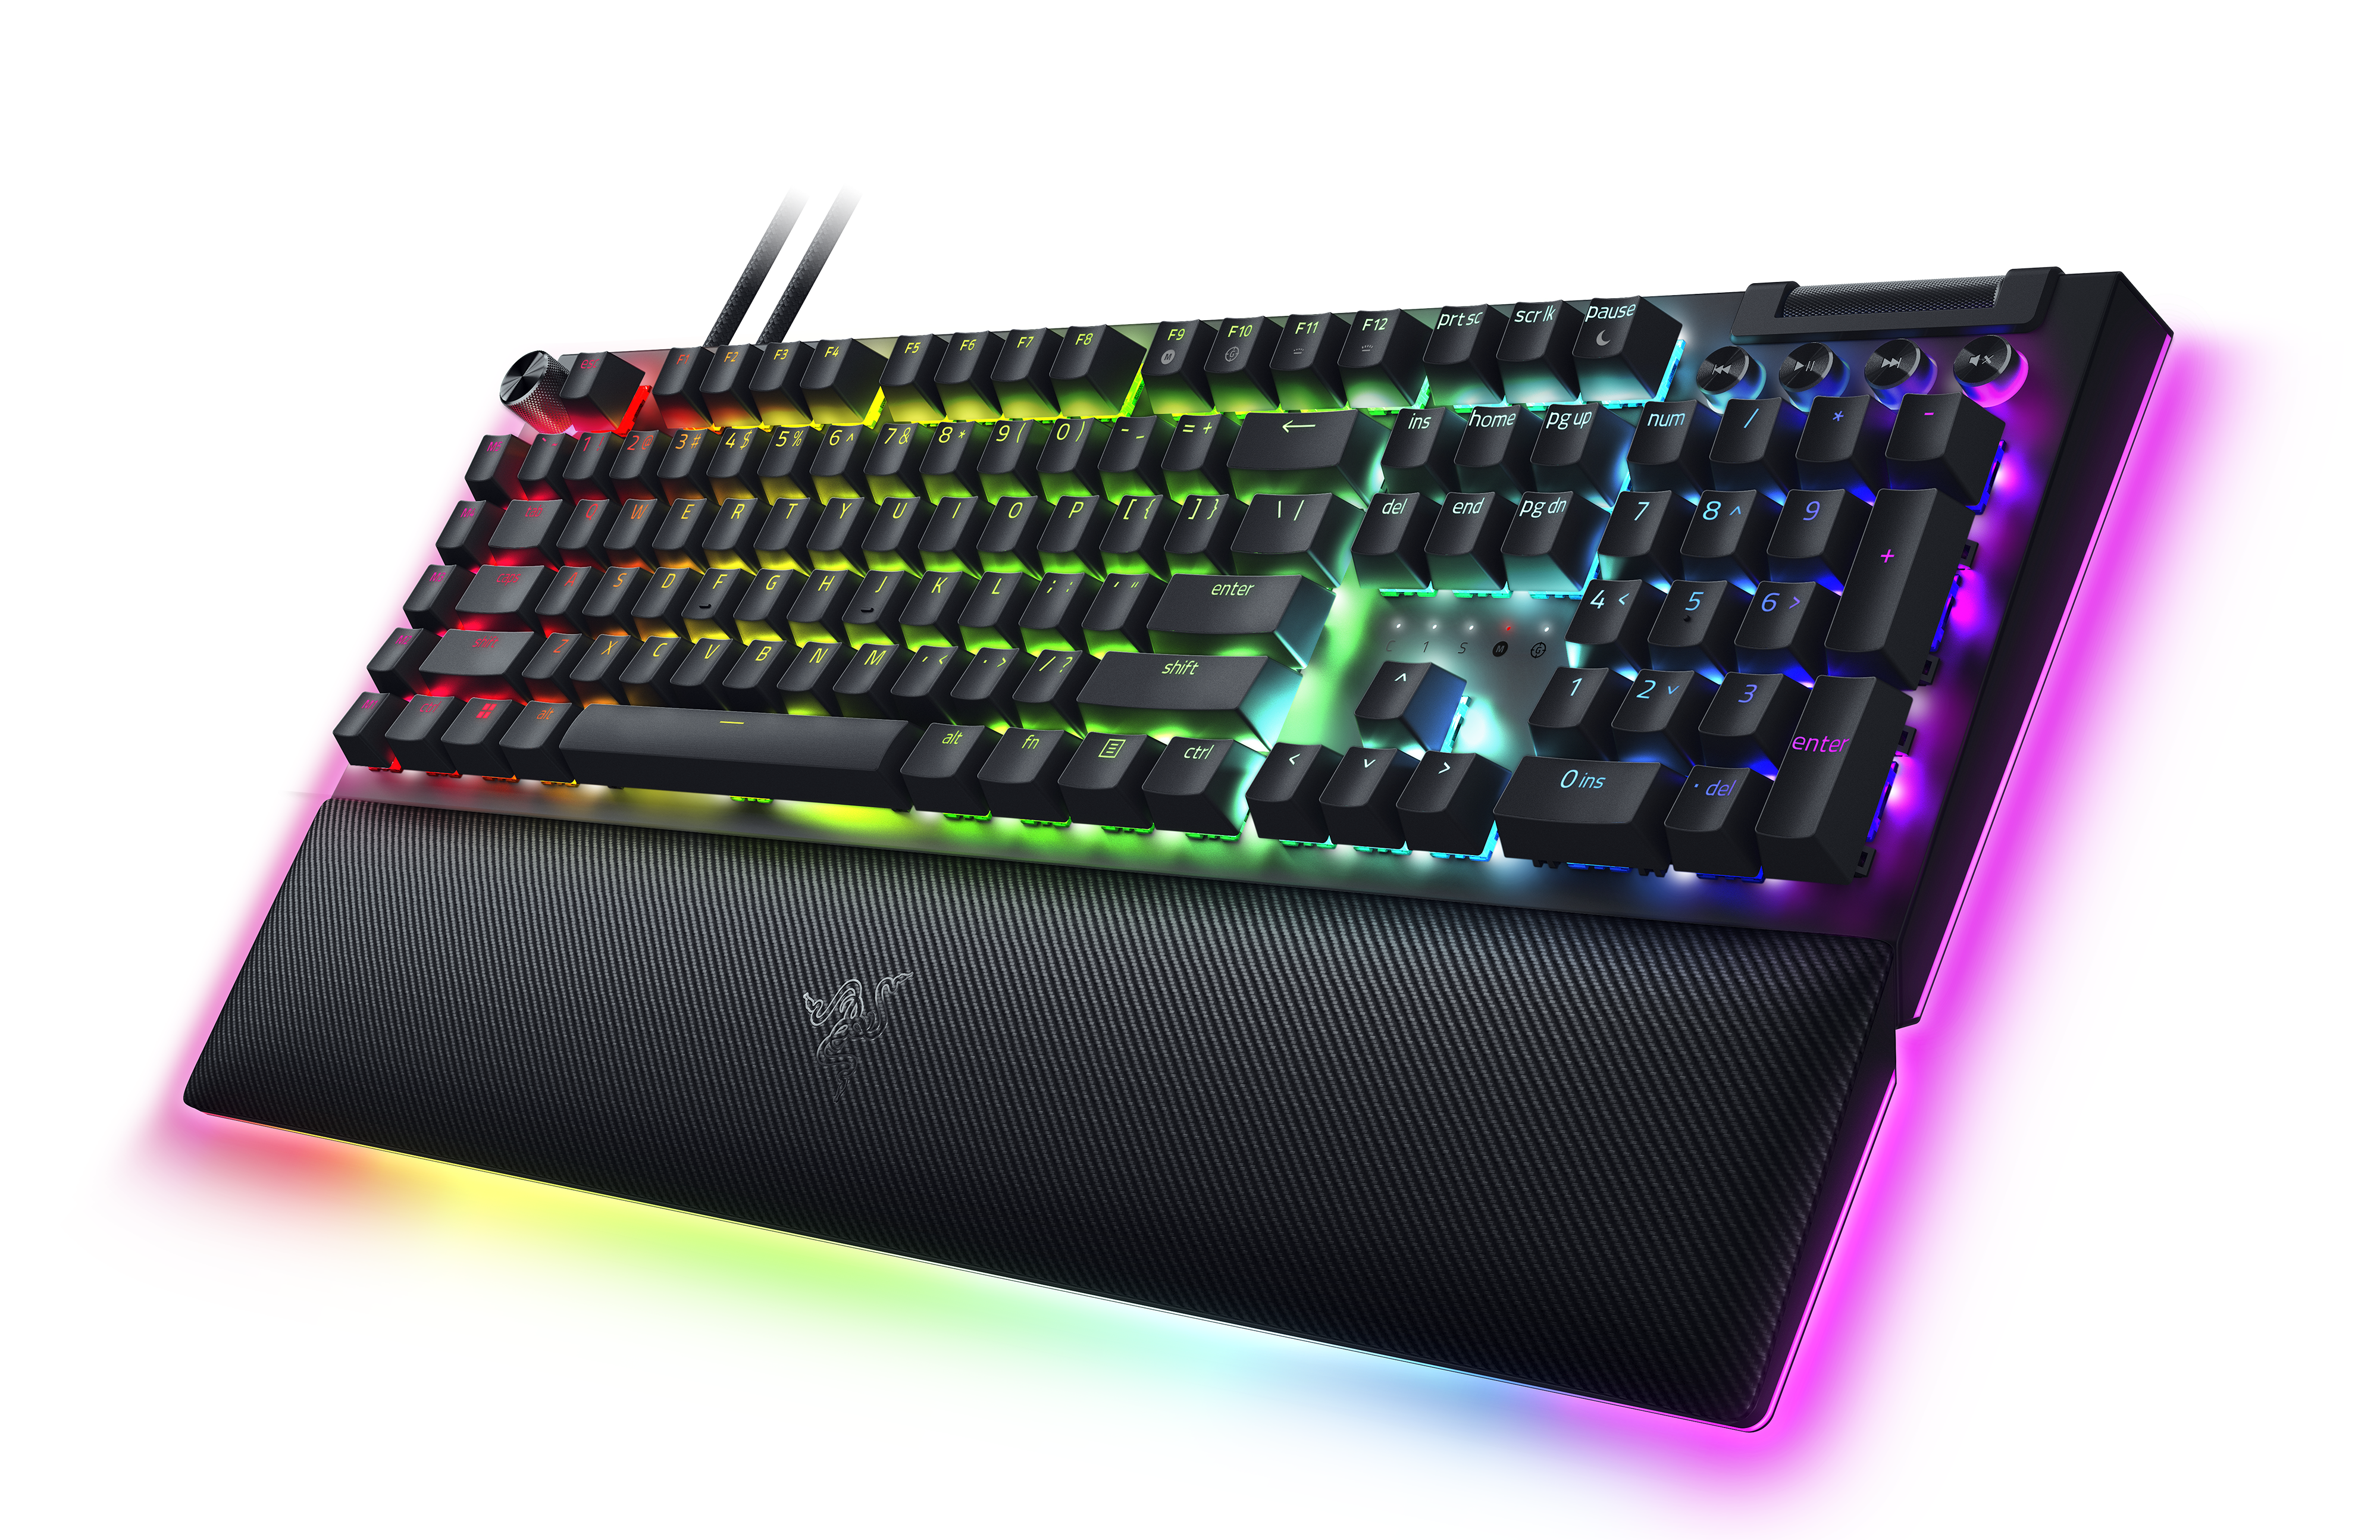 The front of the Razer BlackWidow V4 Pro, which is massive, by the way.